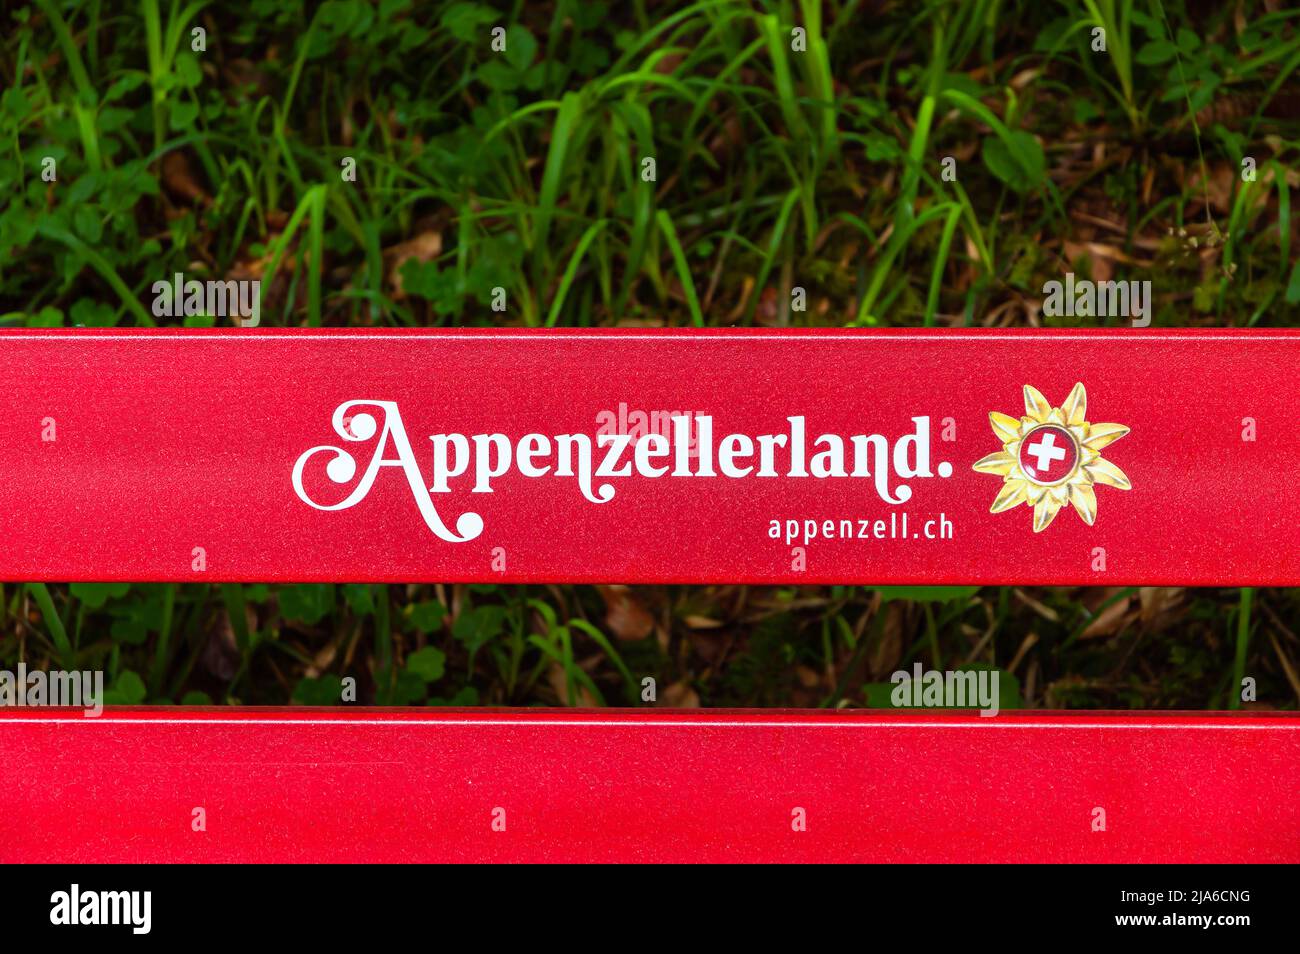 Appenzell, Switzerland - May 27, 2022: Appenzellerland is the name of the hilly landscape of the two cantons of Appenzell Ausserrhoden and Innerrhoden Stock Photo